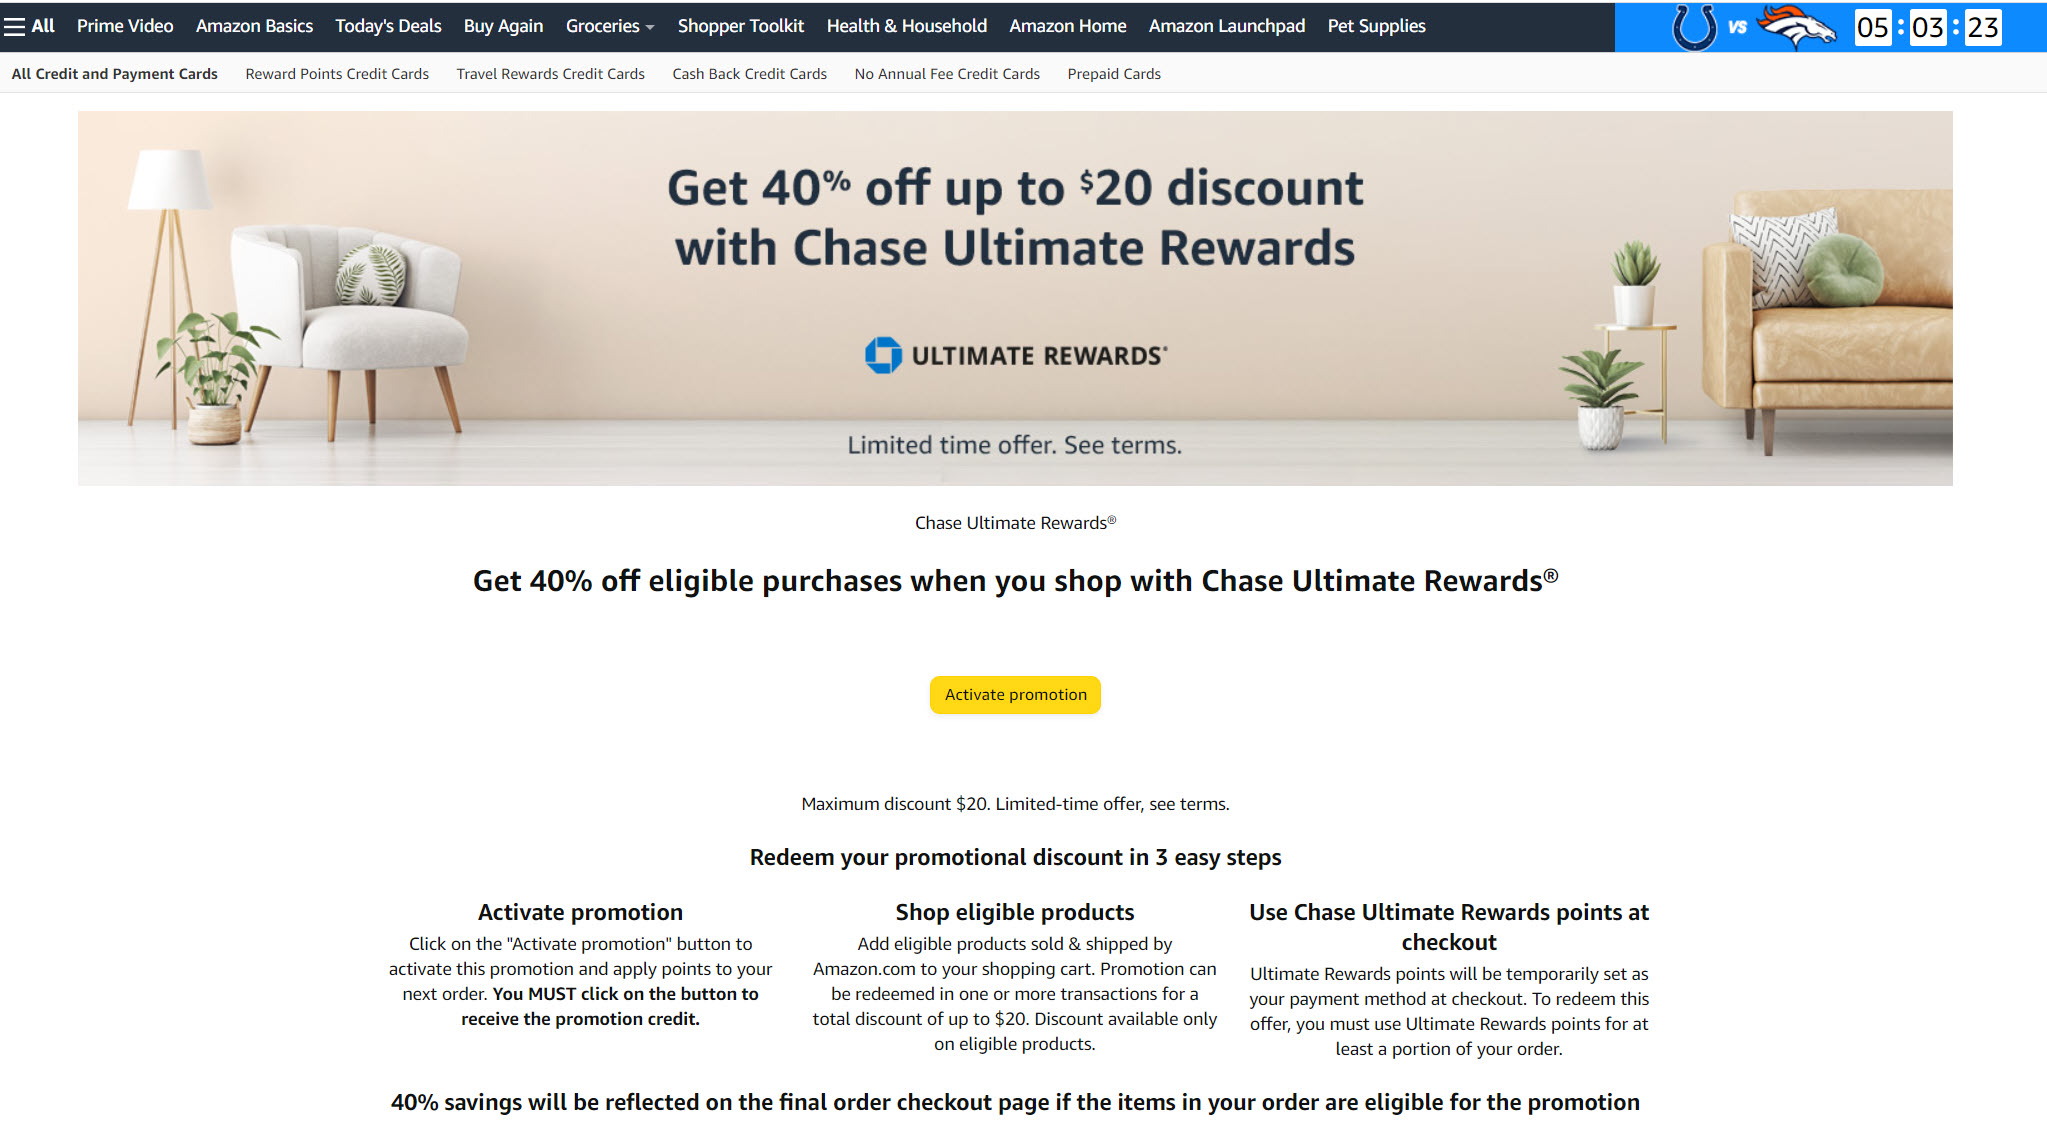 Amazon: Get 40% off eligible purchases when you shop with Chase Ultimate Rewards® (Targeted)